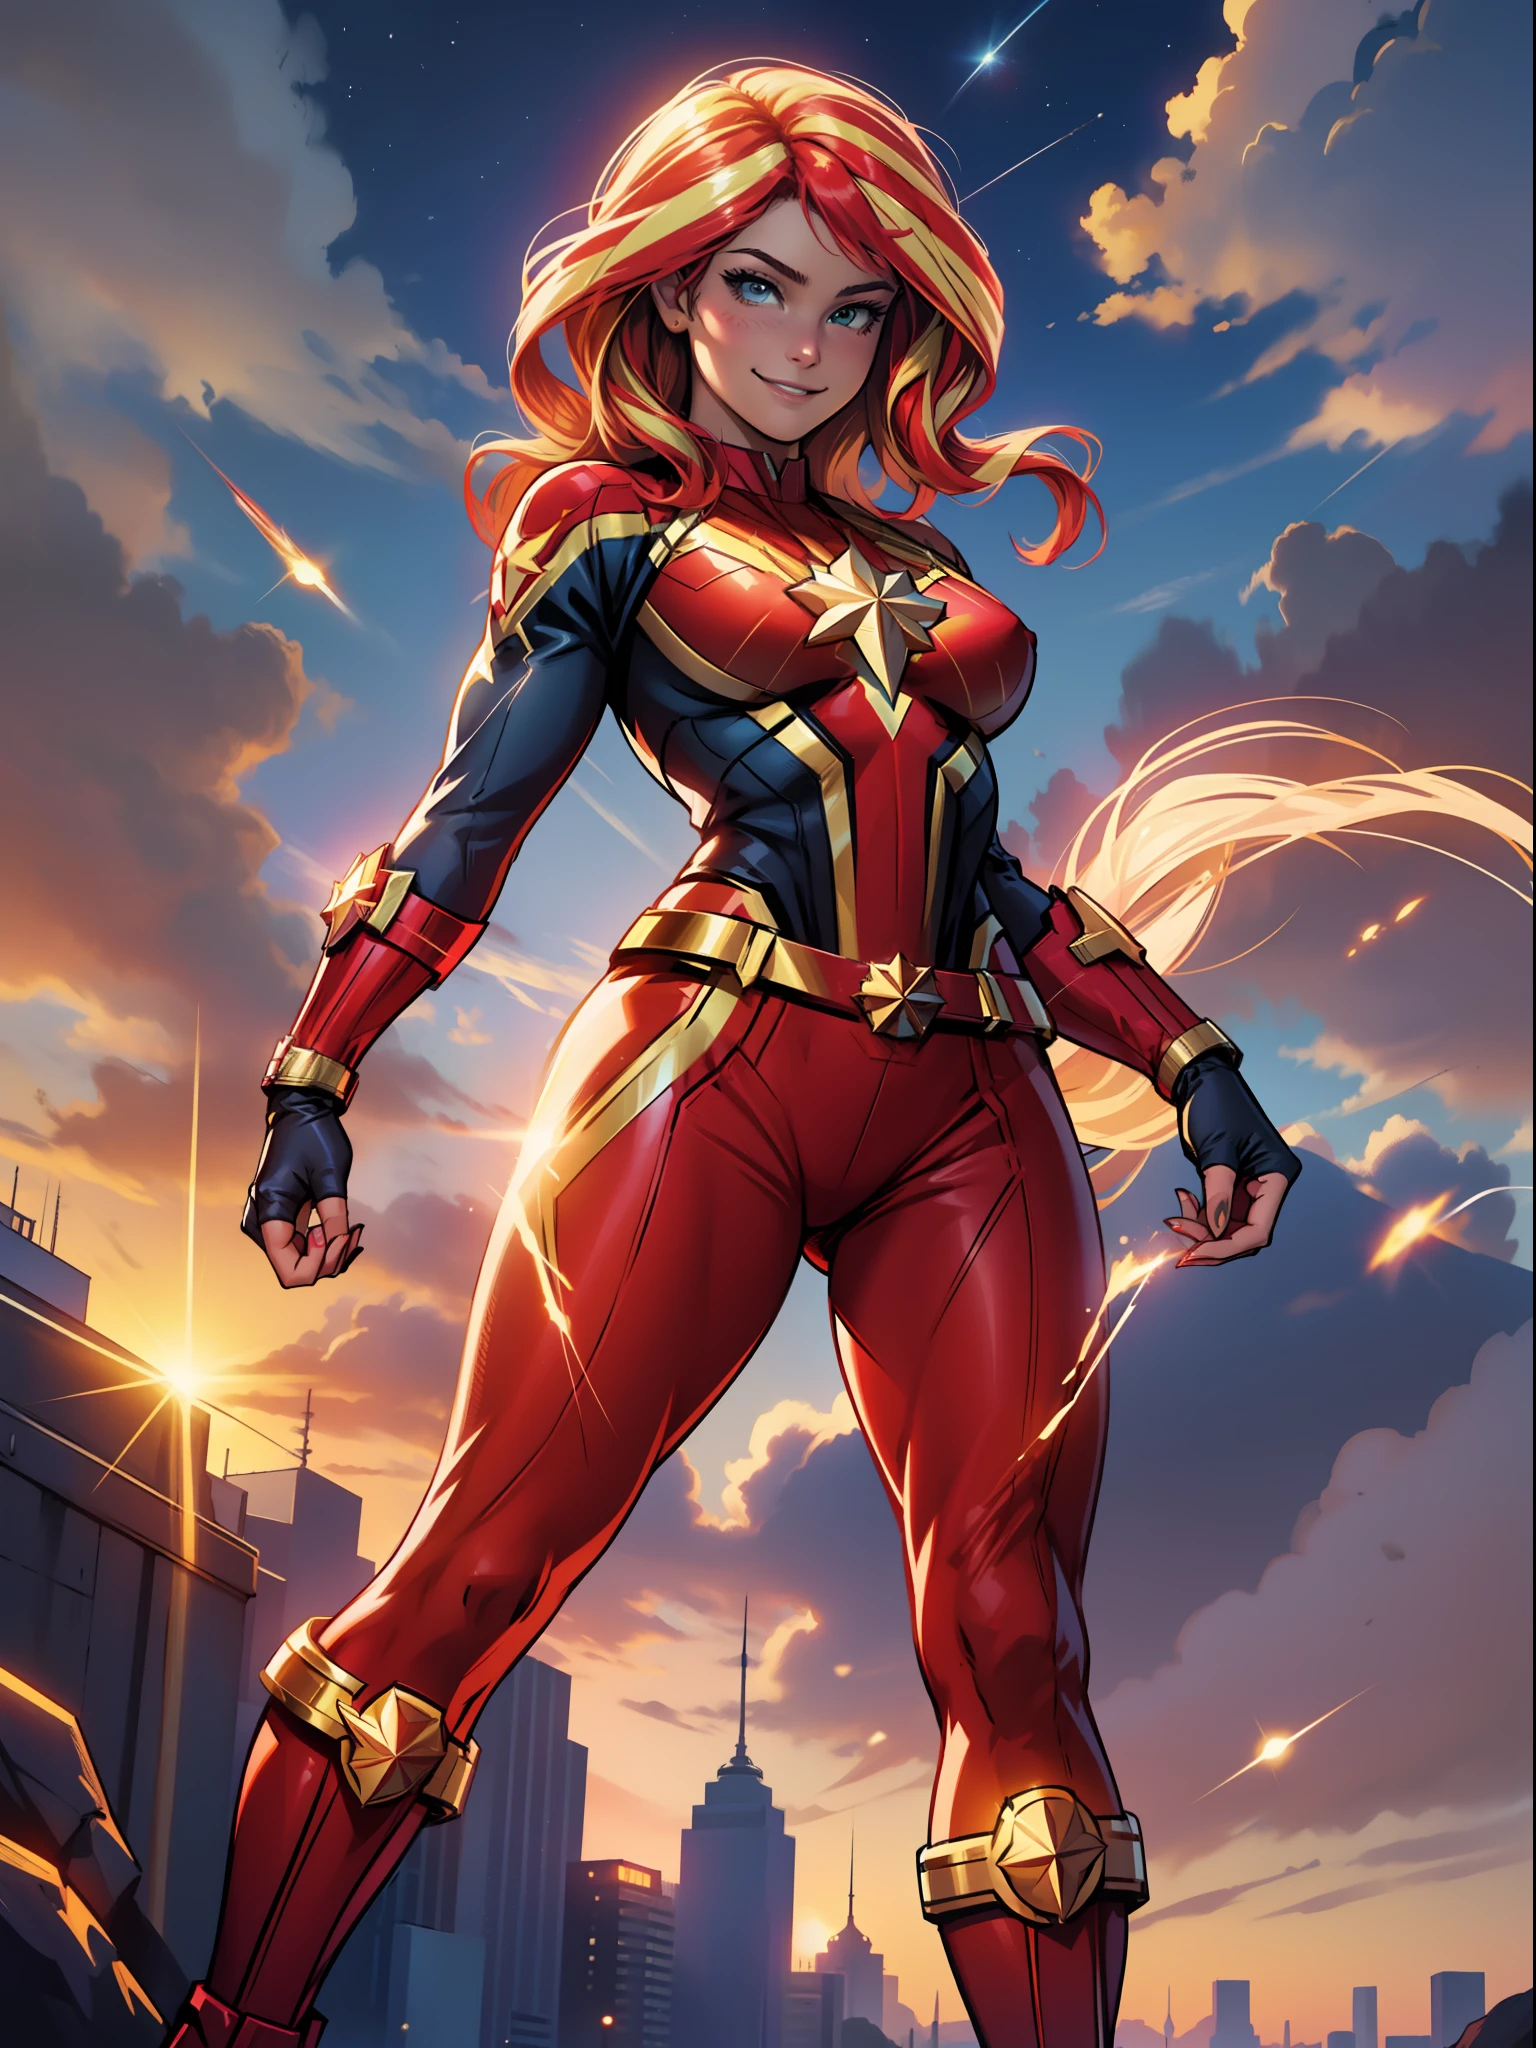 Sunset Shimmer, Huge-breasts, Lush breasts, Elastic breasts, hairlong, Luxurious hairstyle, In the costume of Captain Marvel, red yellow suit, Elegant boots, in the sky, superhero, brawn, in full height, Smiling, Magic, Flight beam, beste-Qualit, Very detailed, 8K quality, in full height